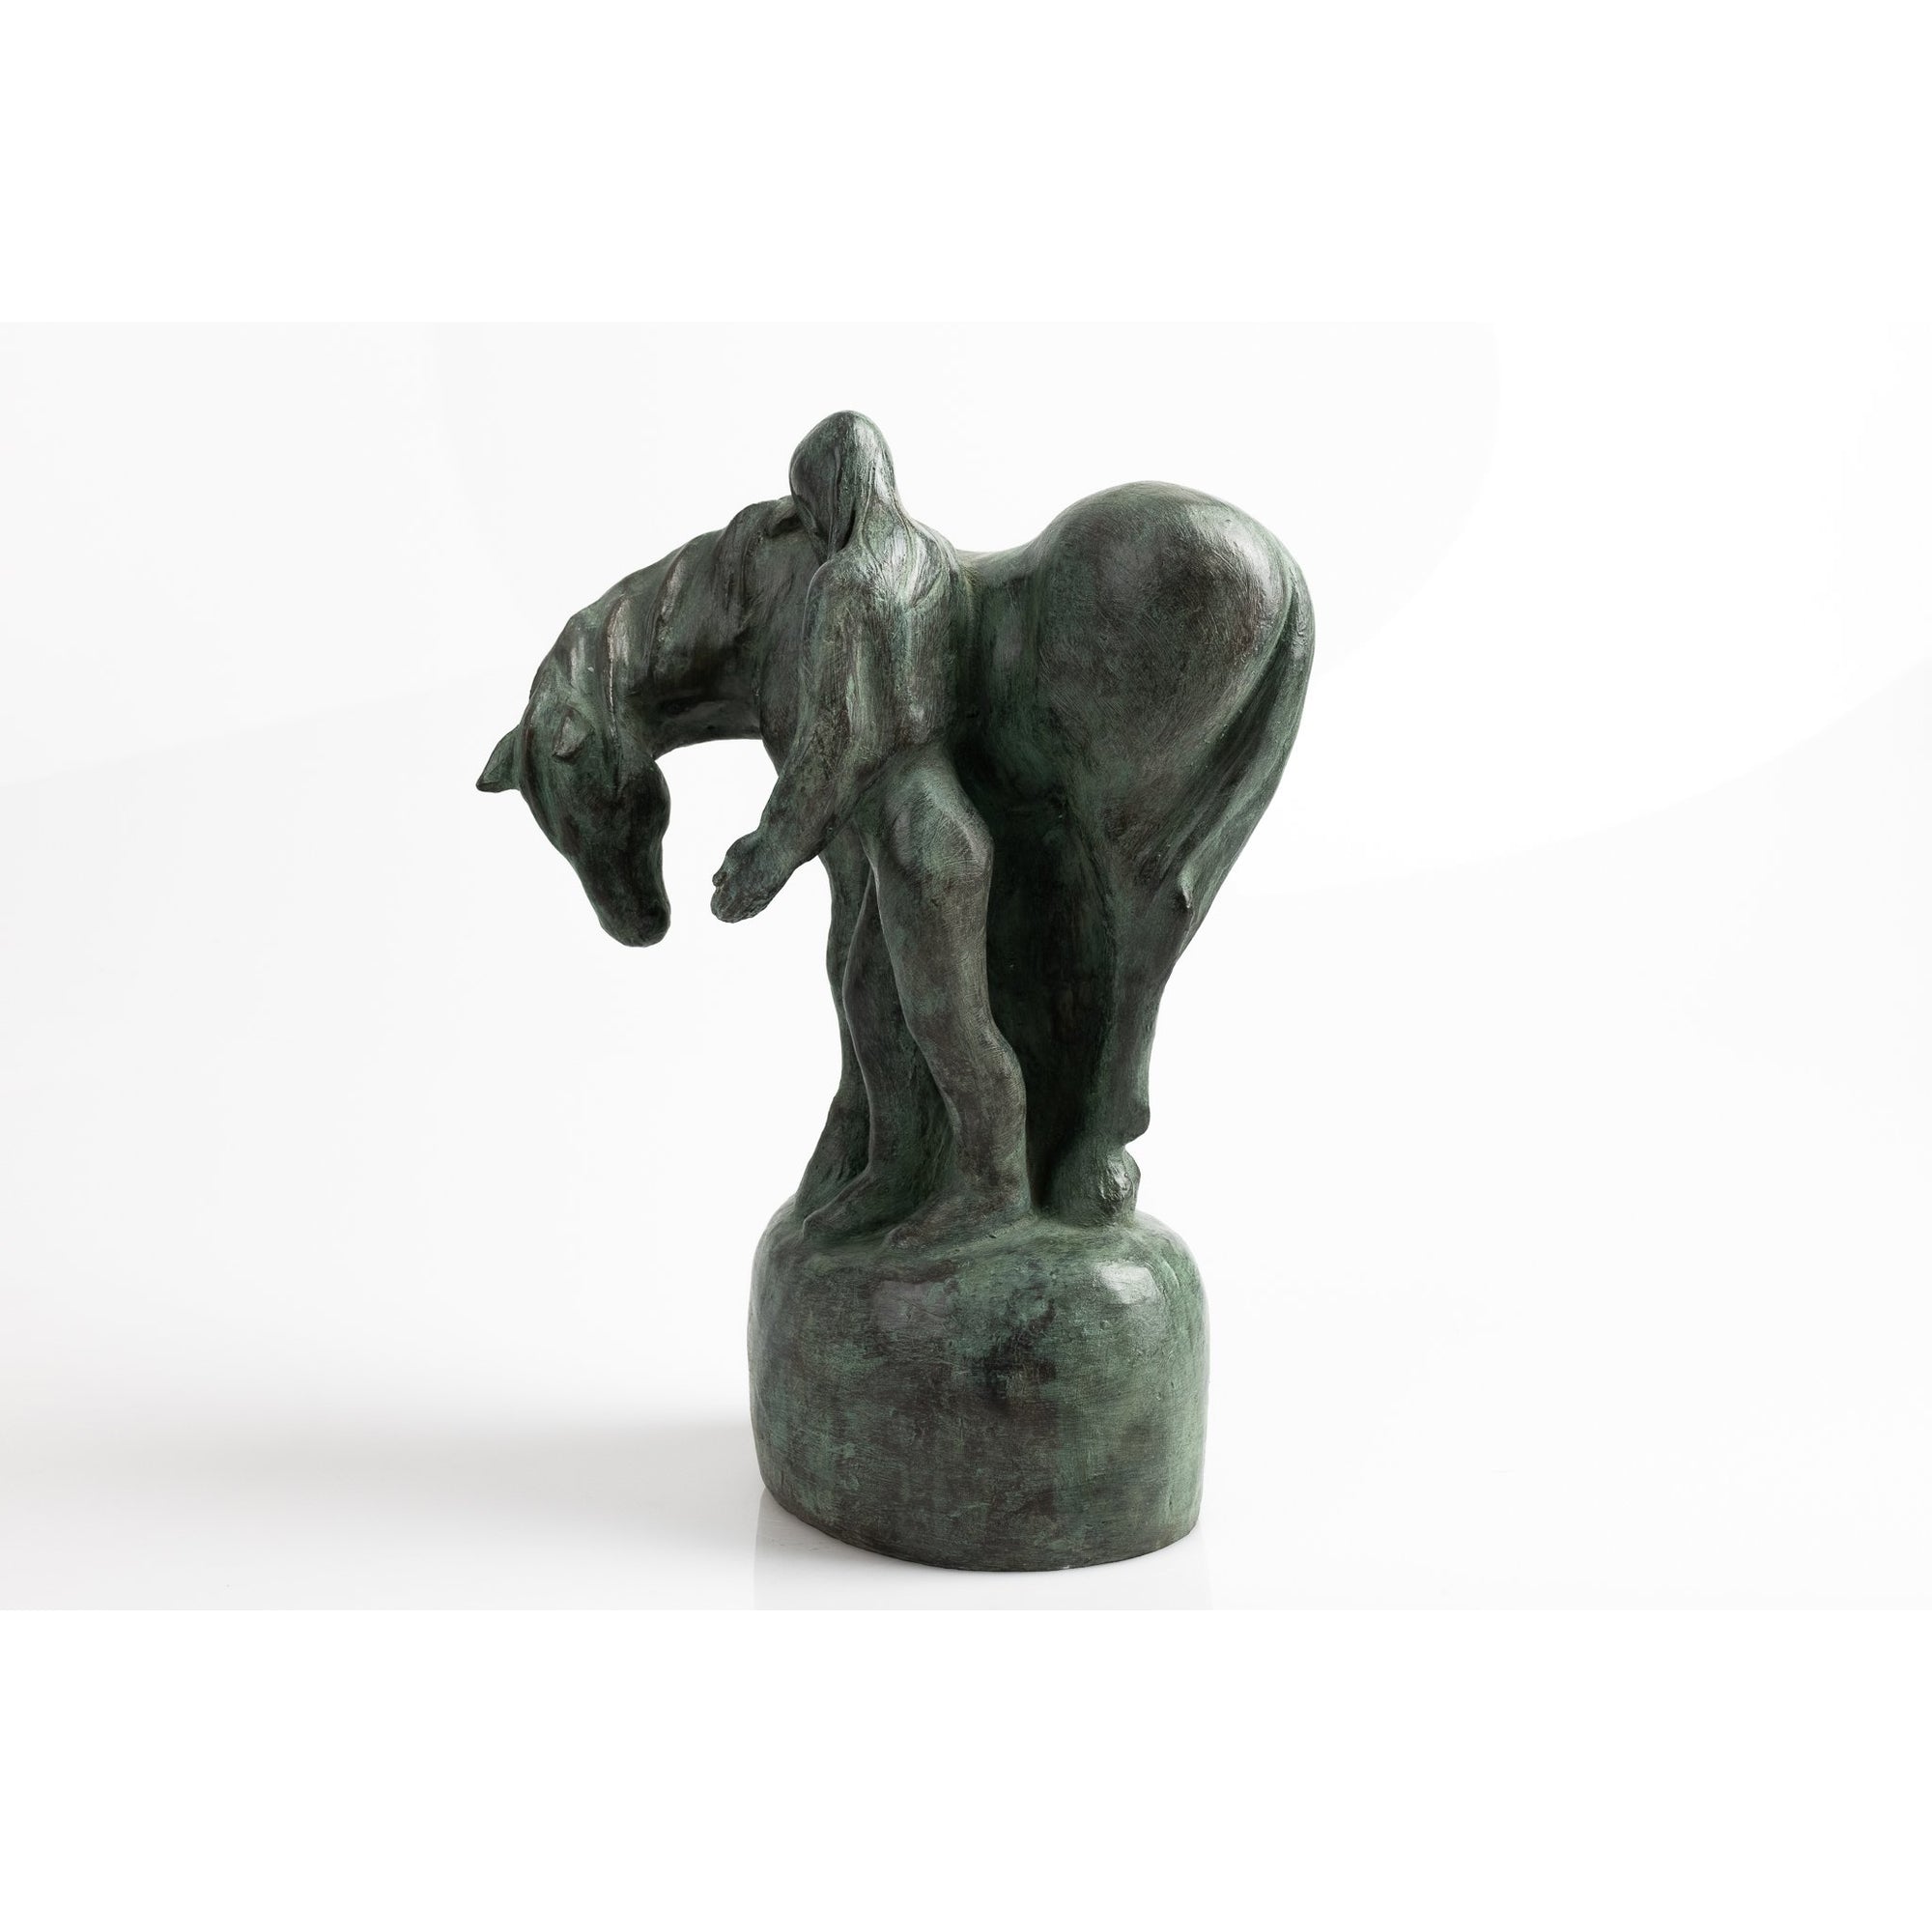 'Friends' limited edition sculpture by Sophie Howard, available at Padstow Gallery, Cornwall